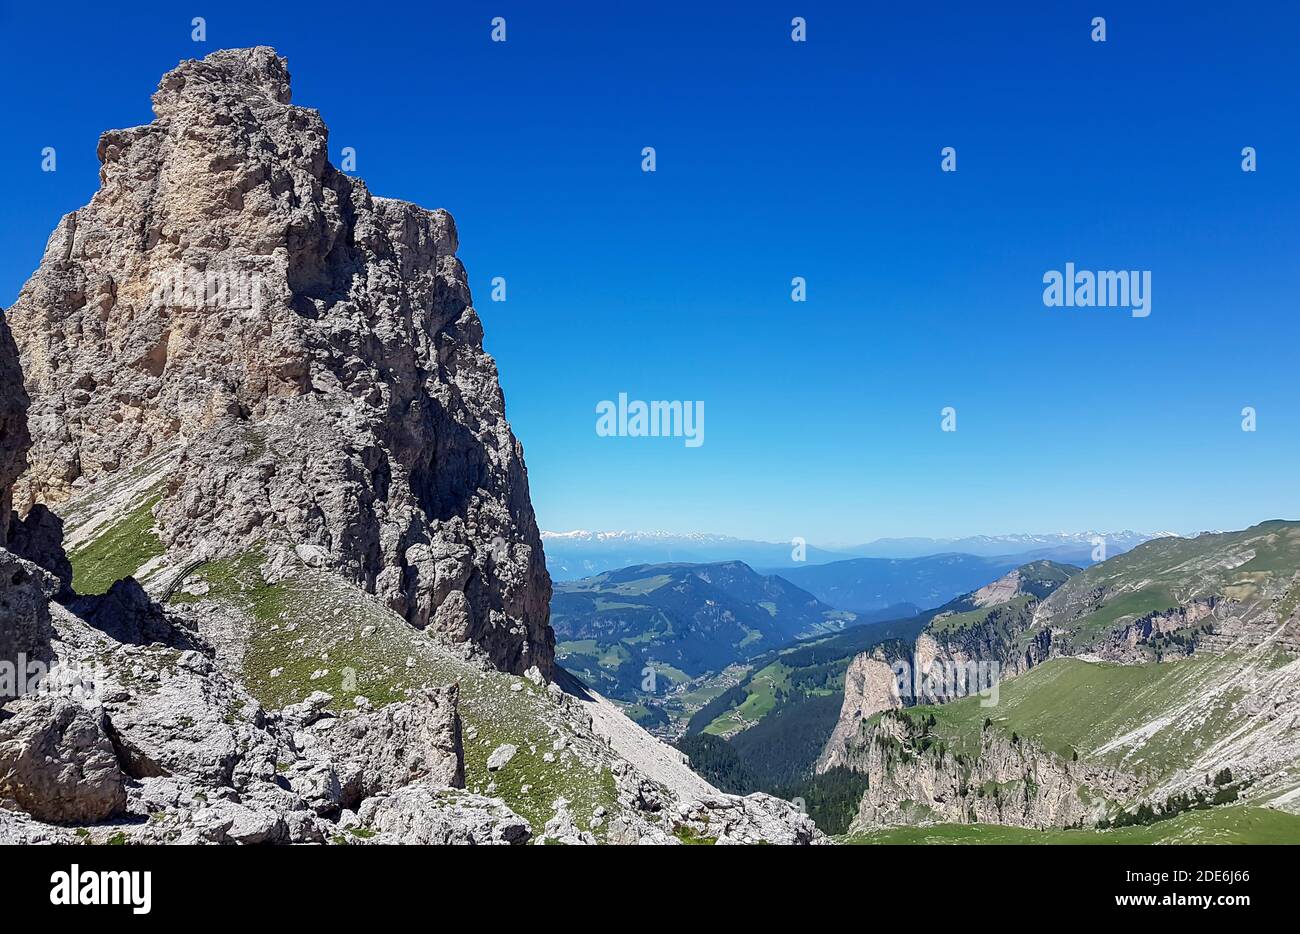 Big rock on top of amountain in alps tyrol with blue summer sky Stock Photo